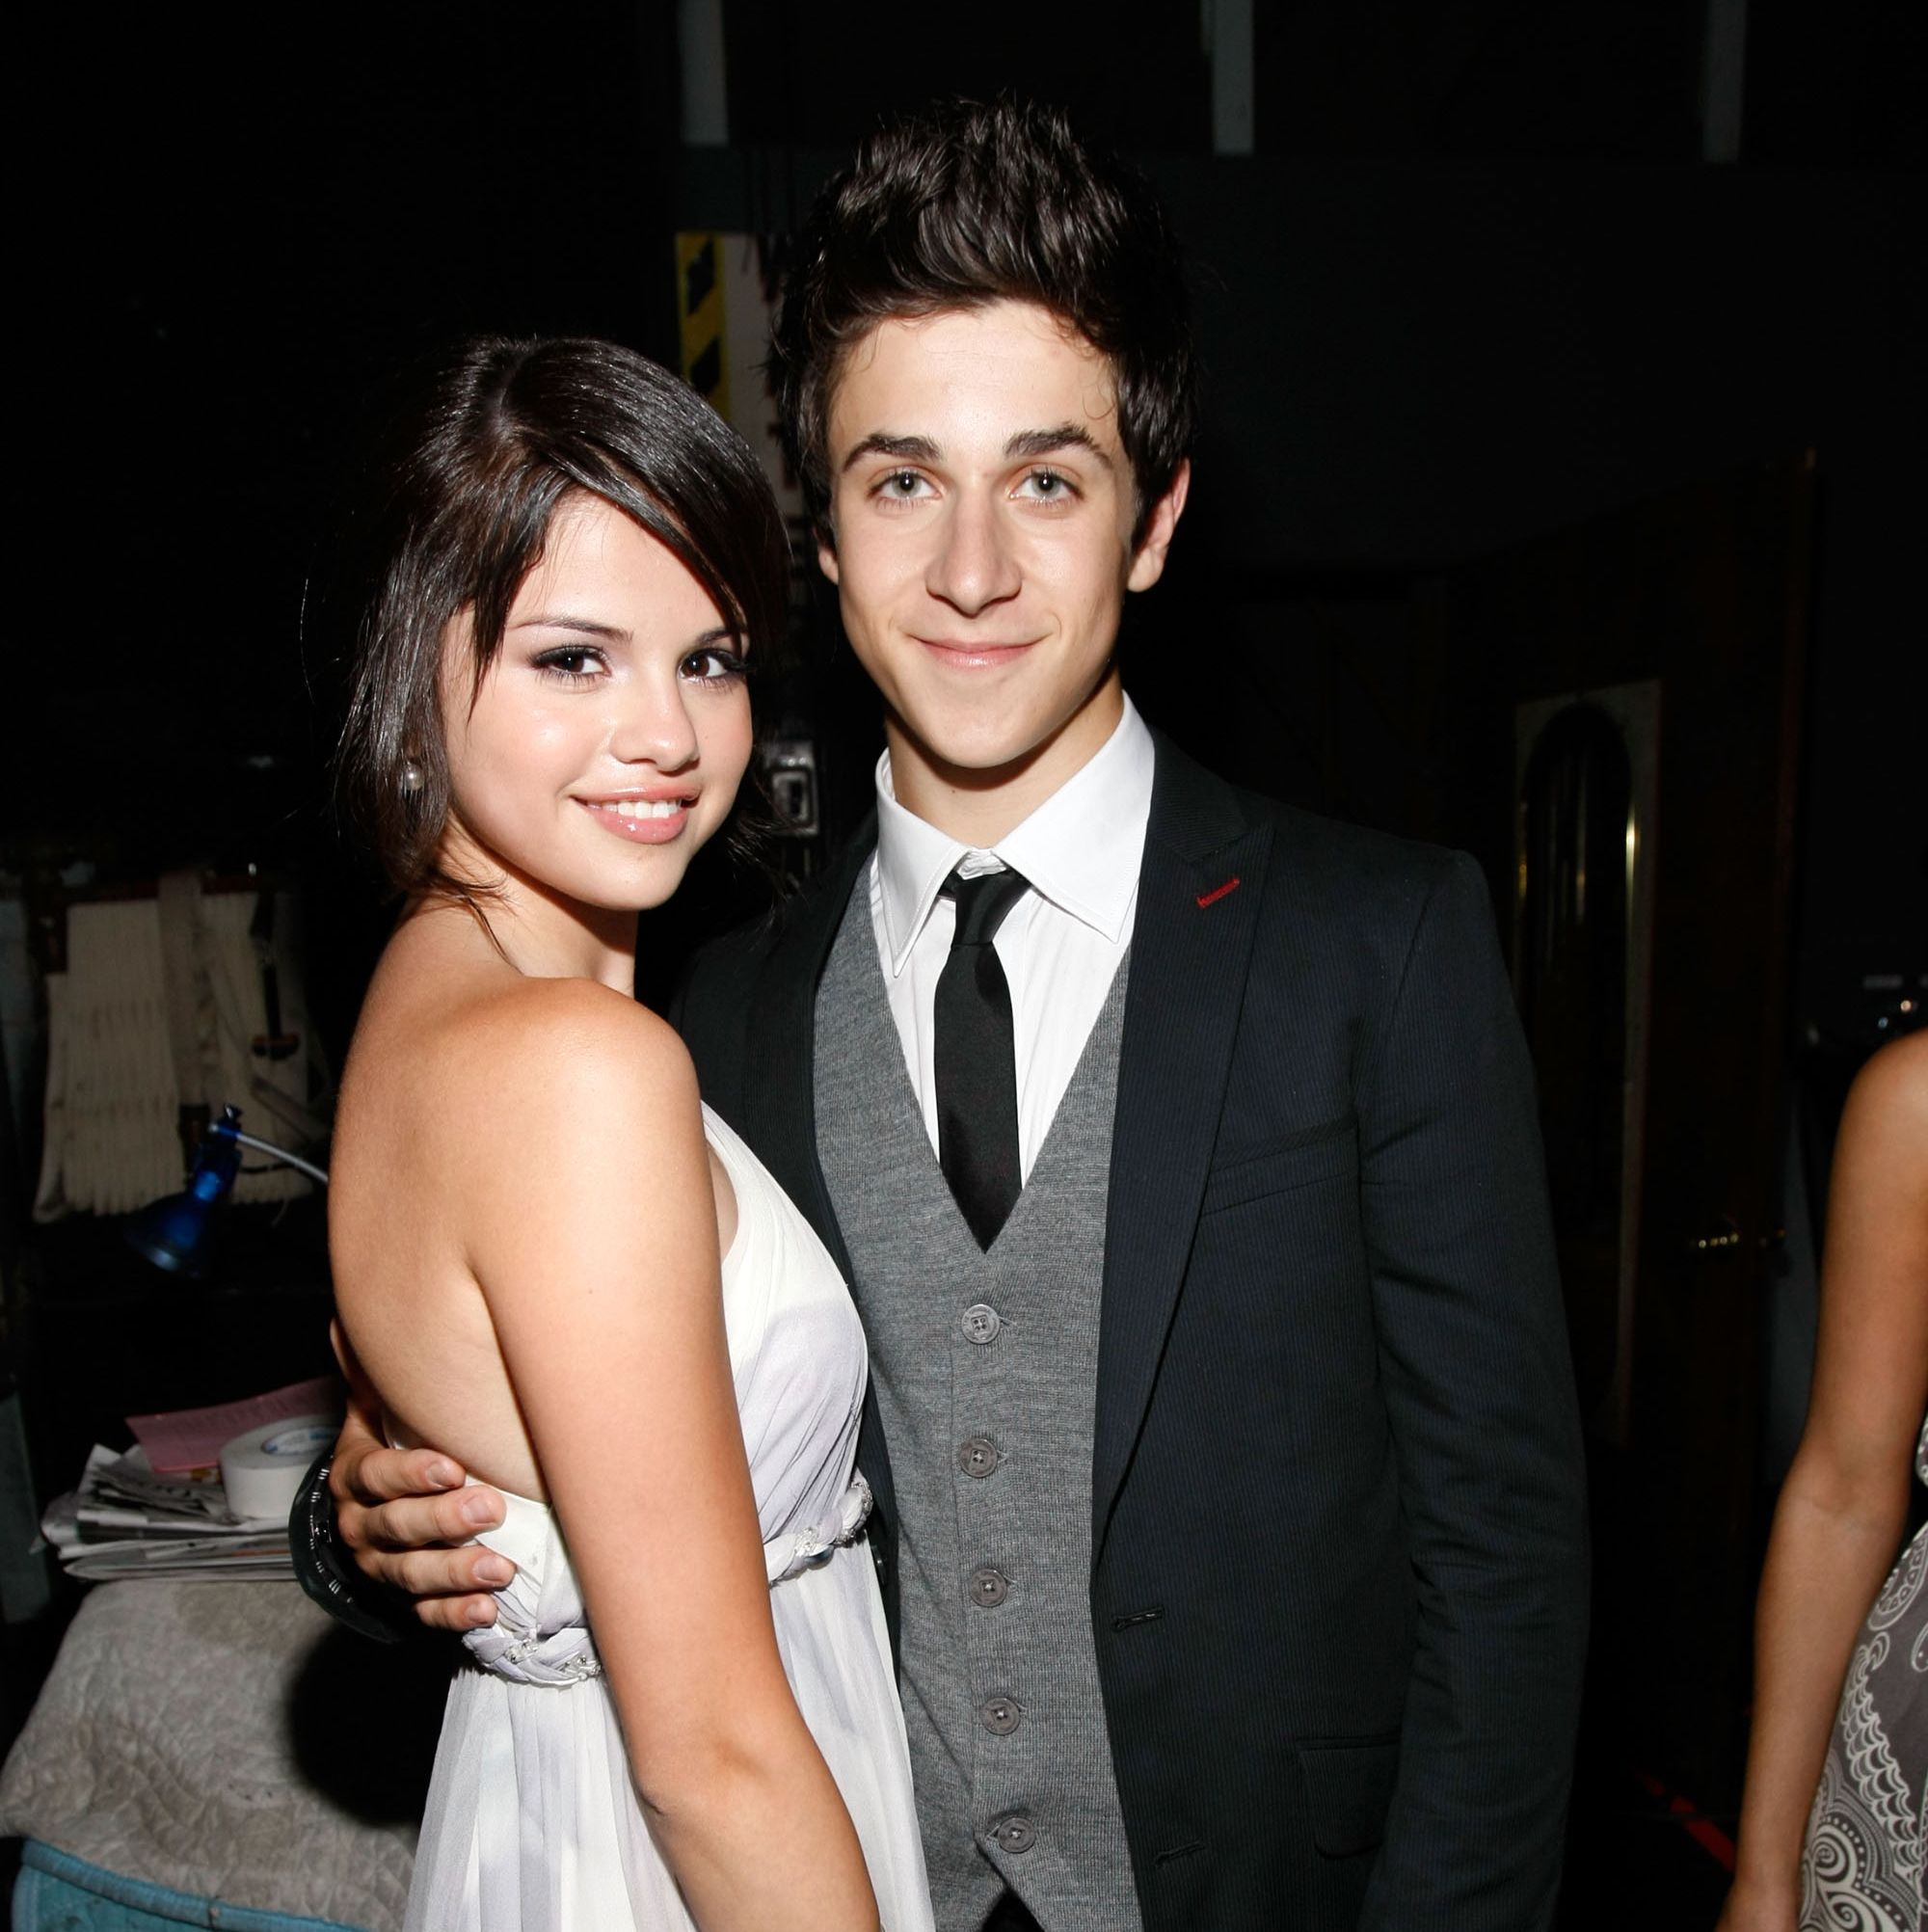 Selena Gomez and David Henrie Are Reuniting for a 'Wizards of Waverly Place' Sequel